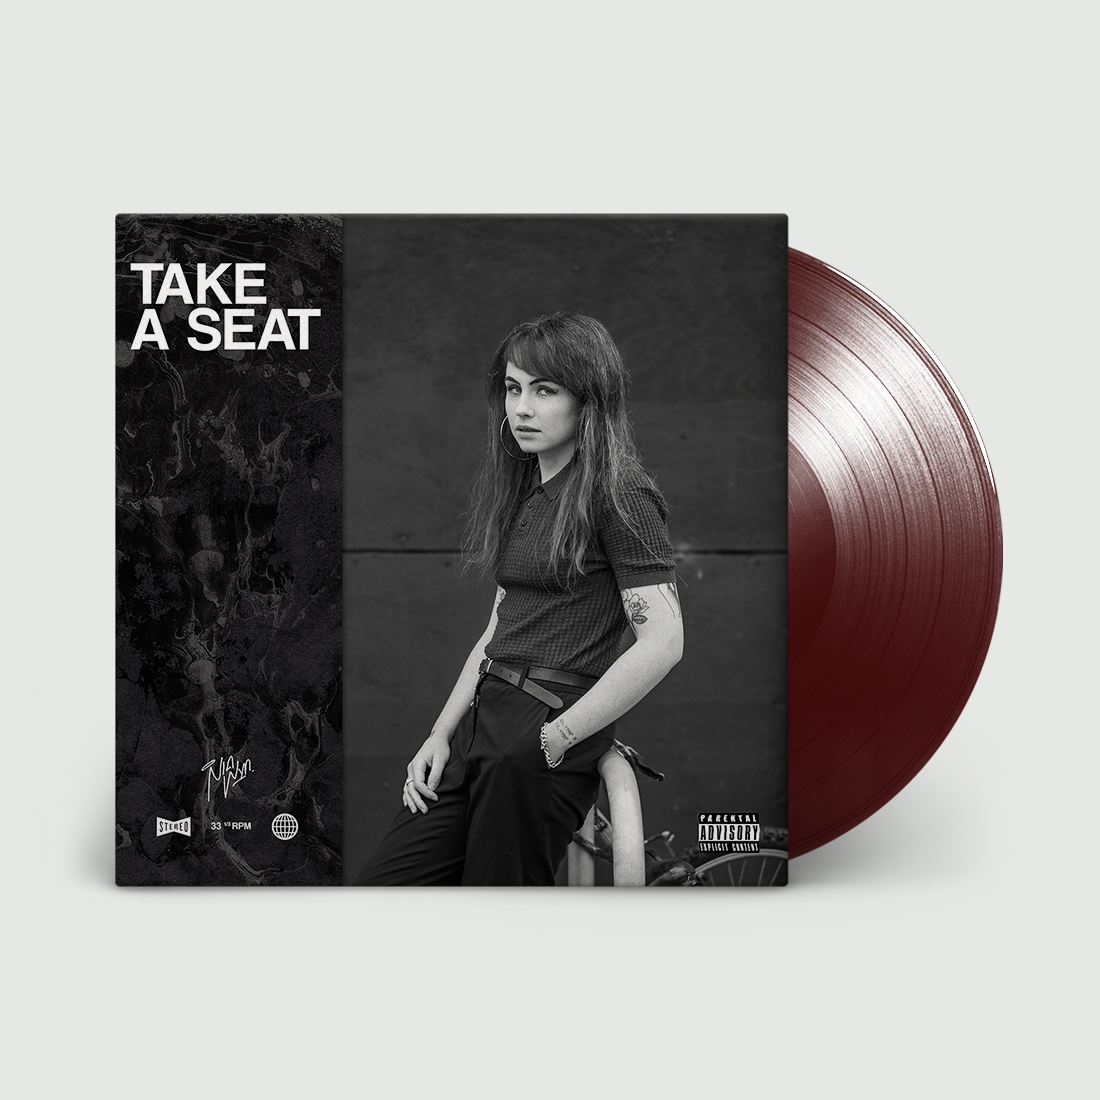 Take A Seat: Signed Mulberry Vinyl LP